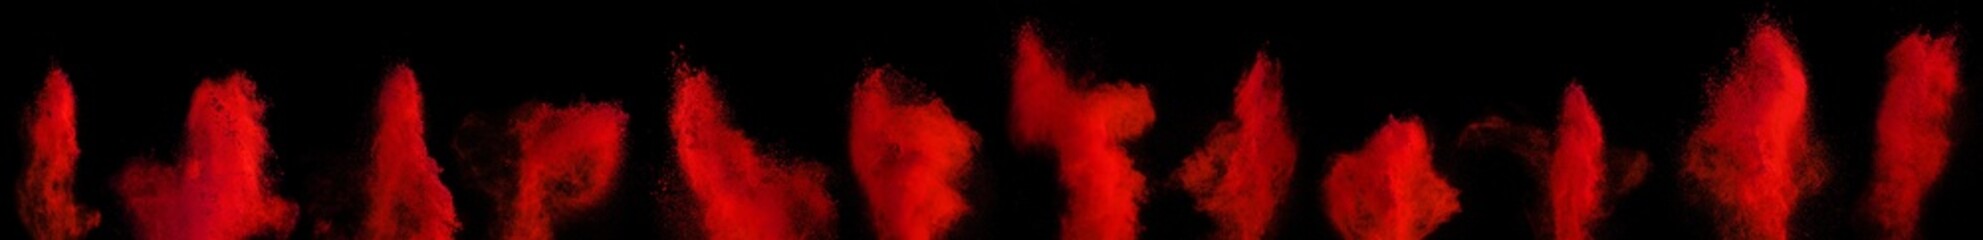 set collection row red holi paint color powder explosion isolated on dark black background....